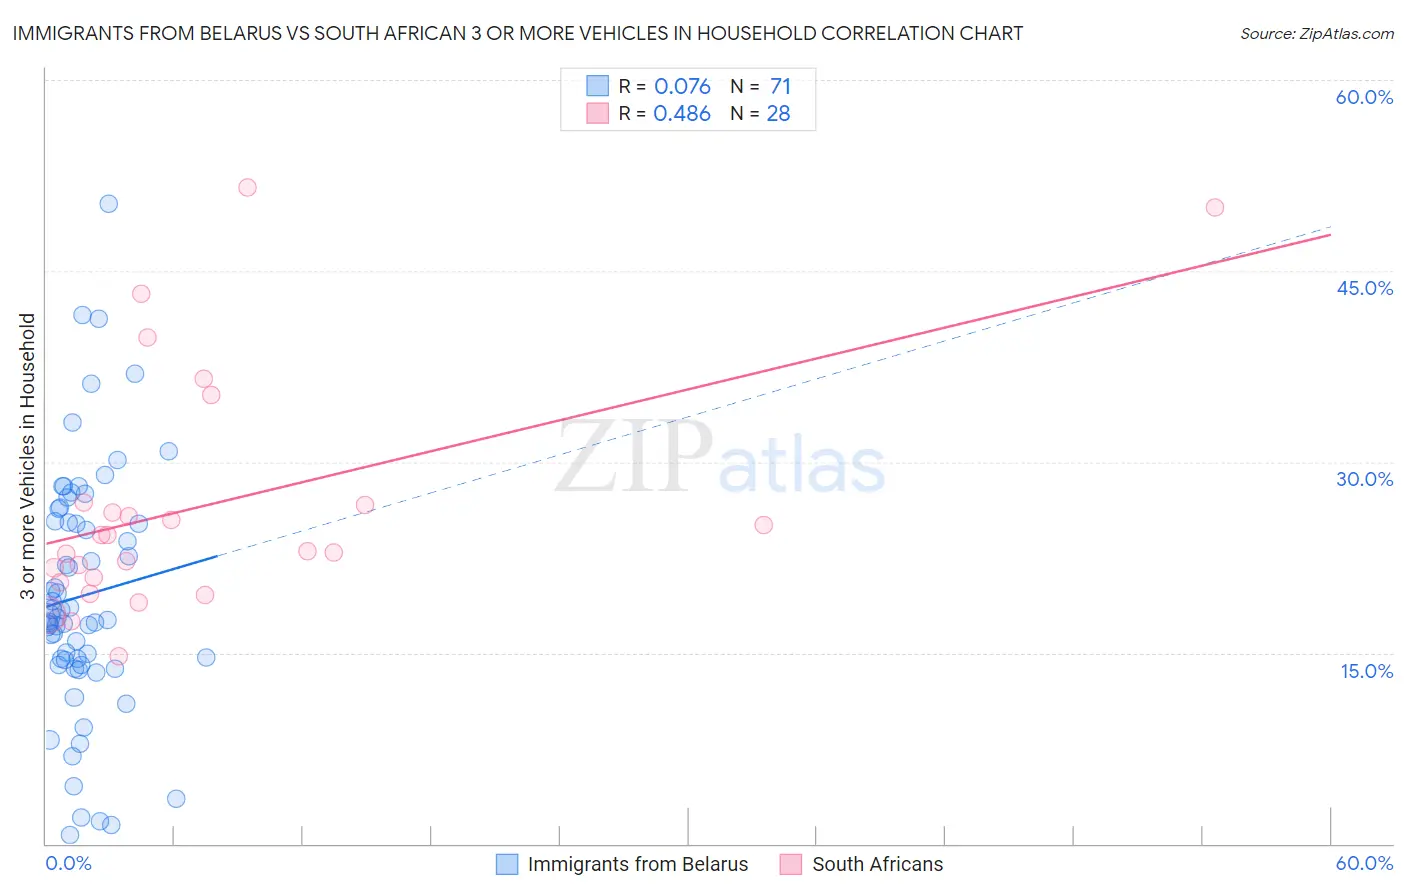 Immigrants from Belarus vs South African 3 or more Vehicles in Household